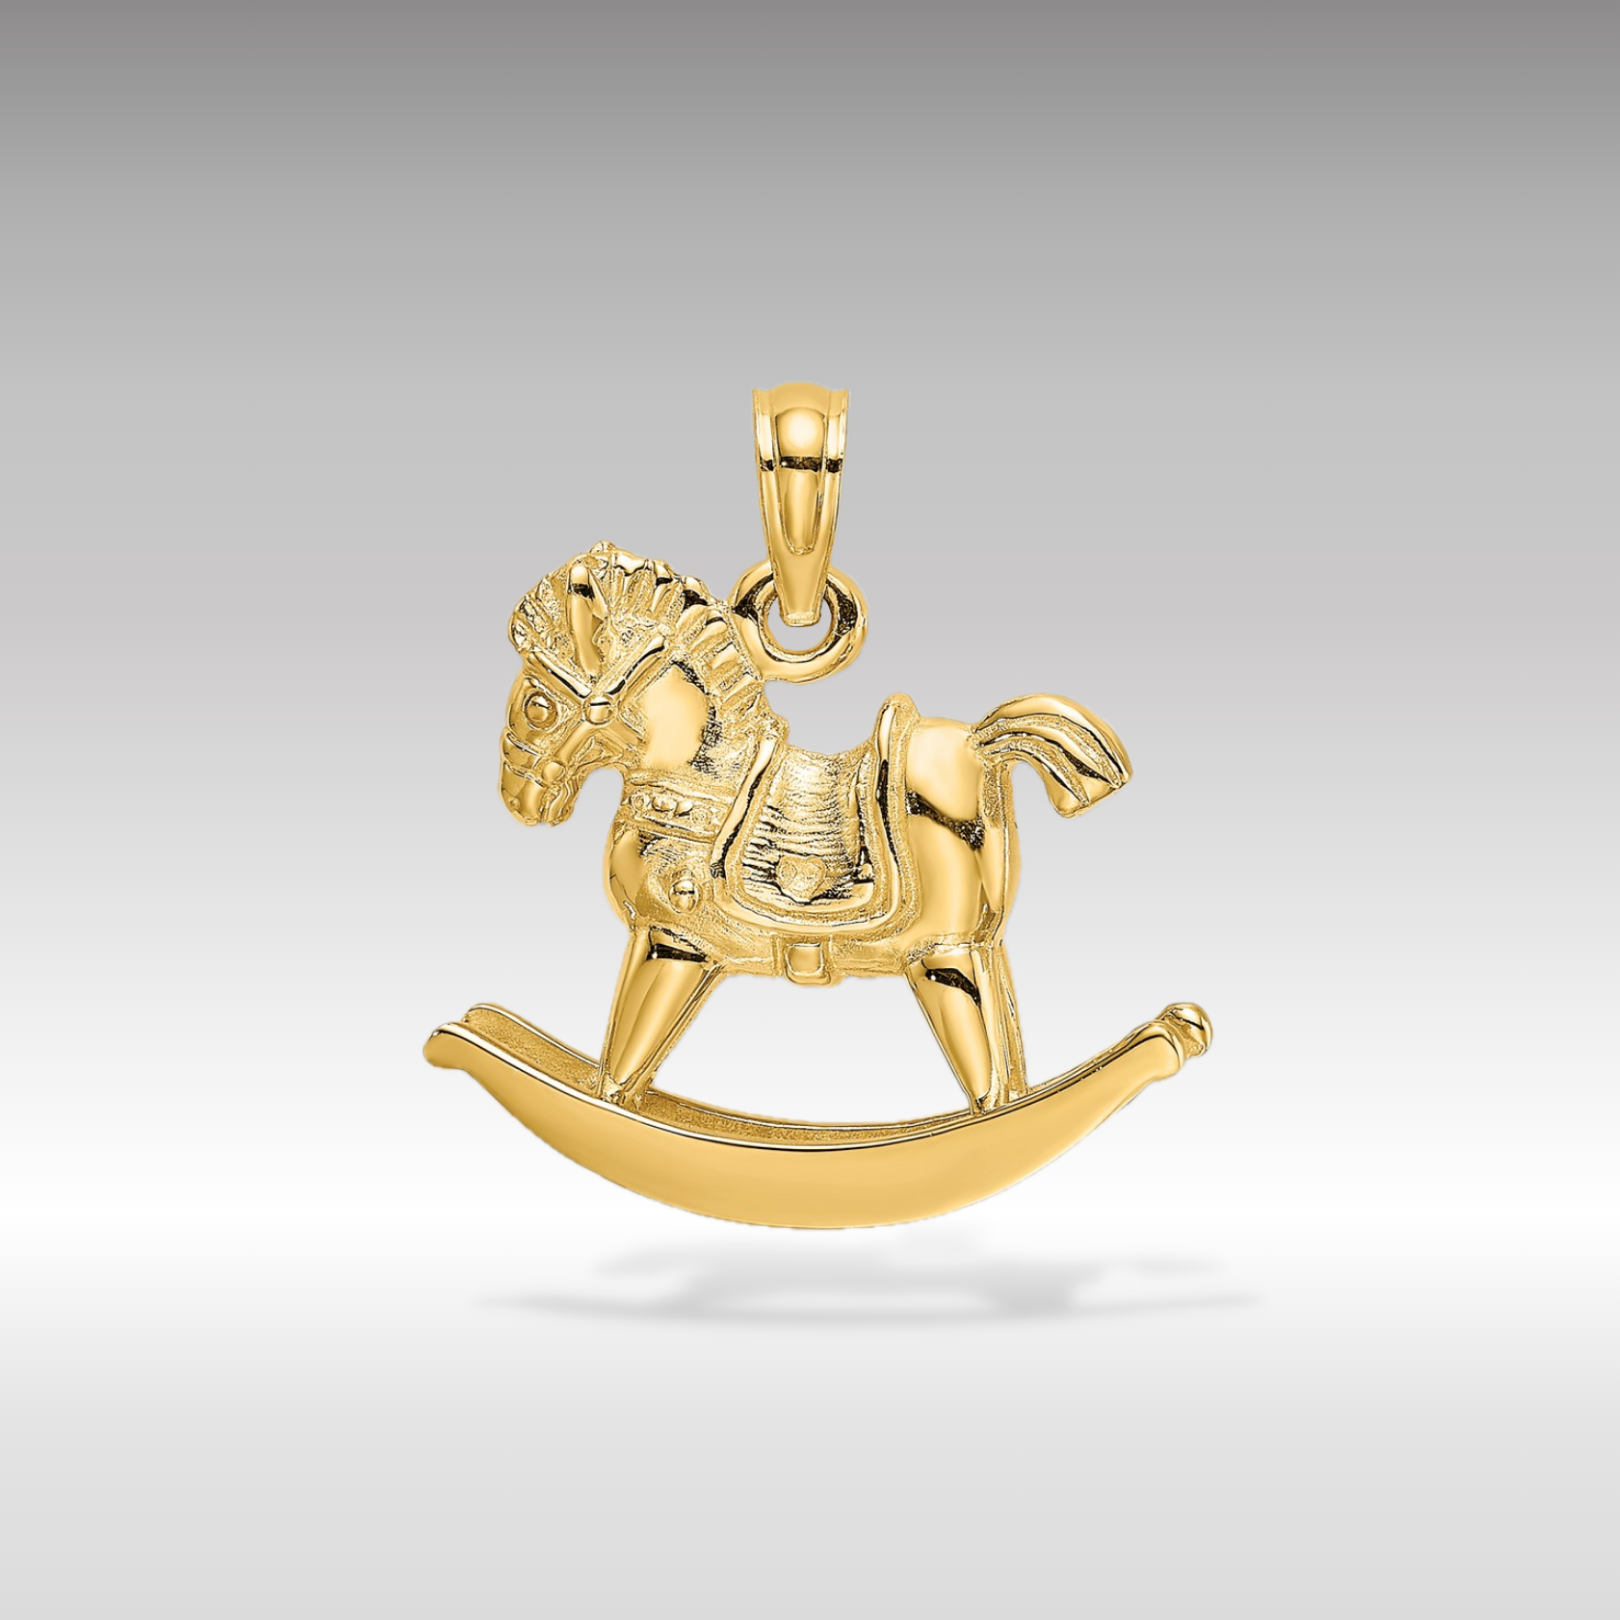 14K Gold 3D Playful Rocking Horse Pendant - Charlie & Co. Jewelry